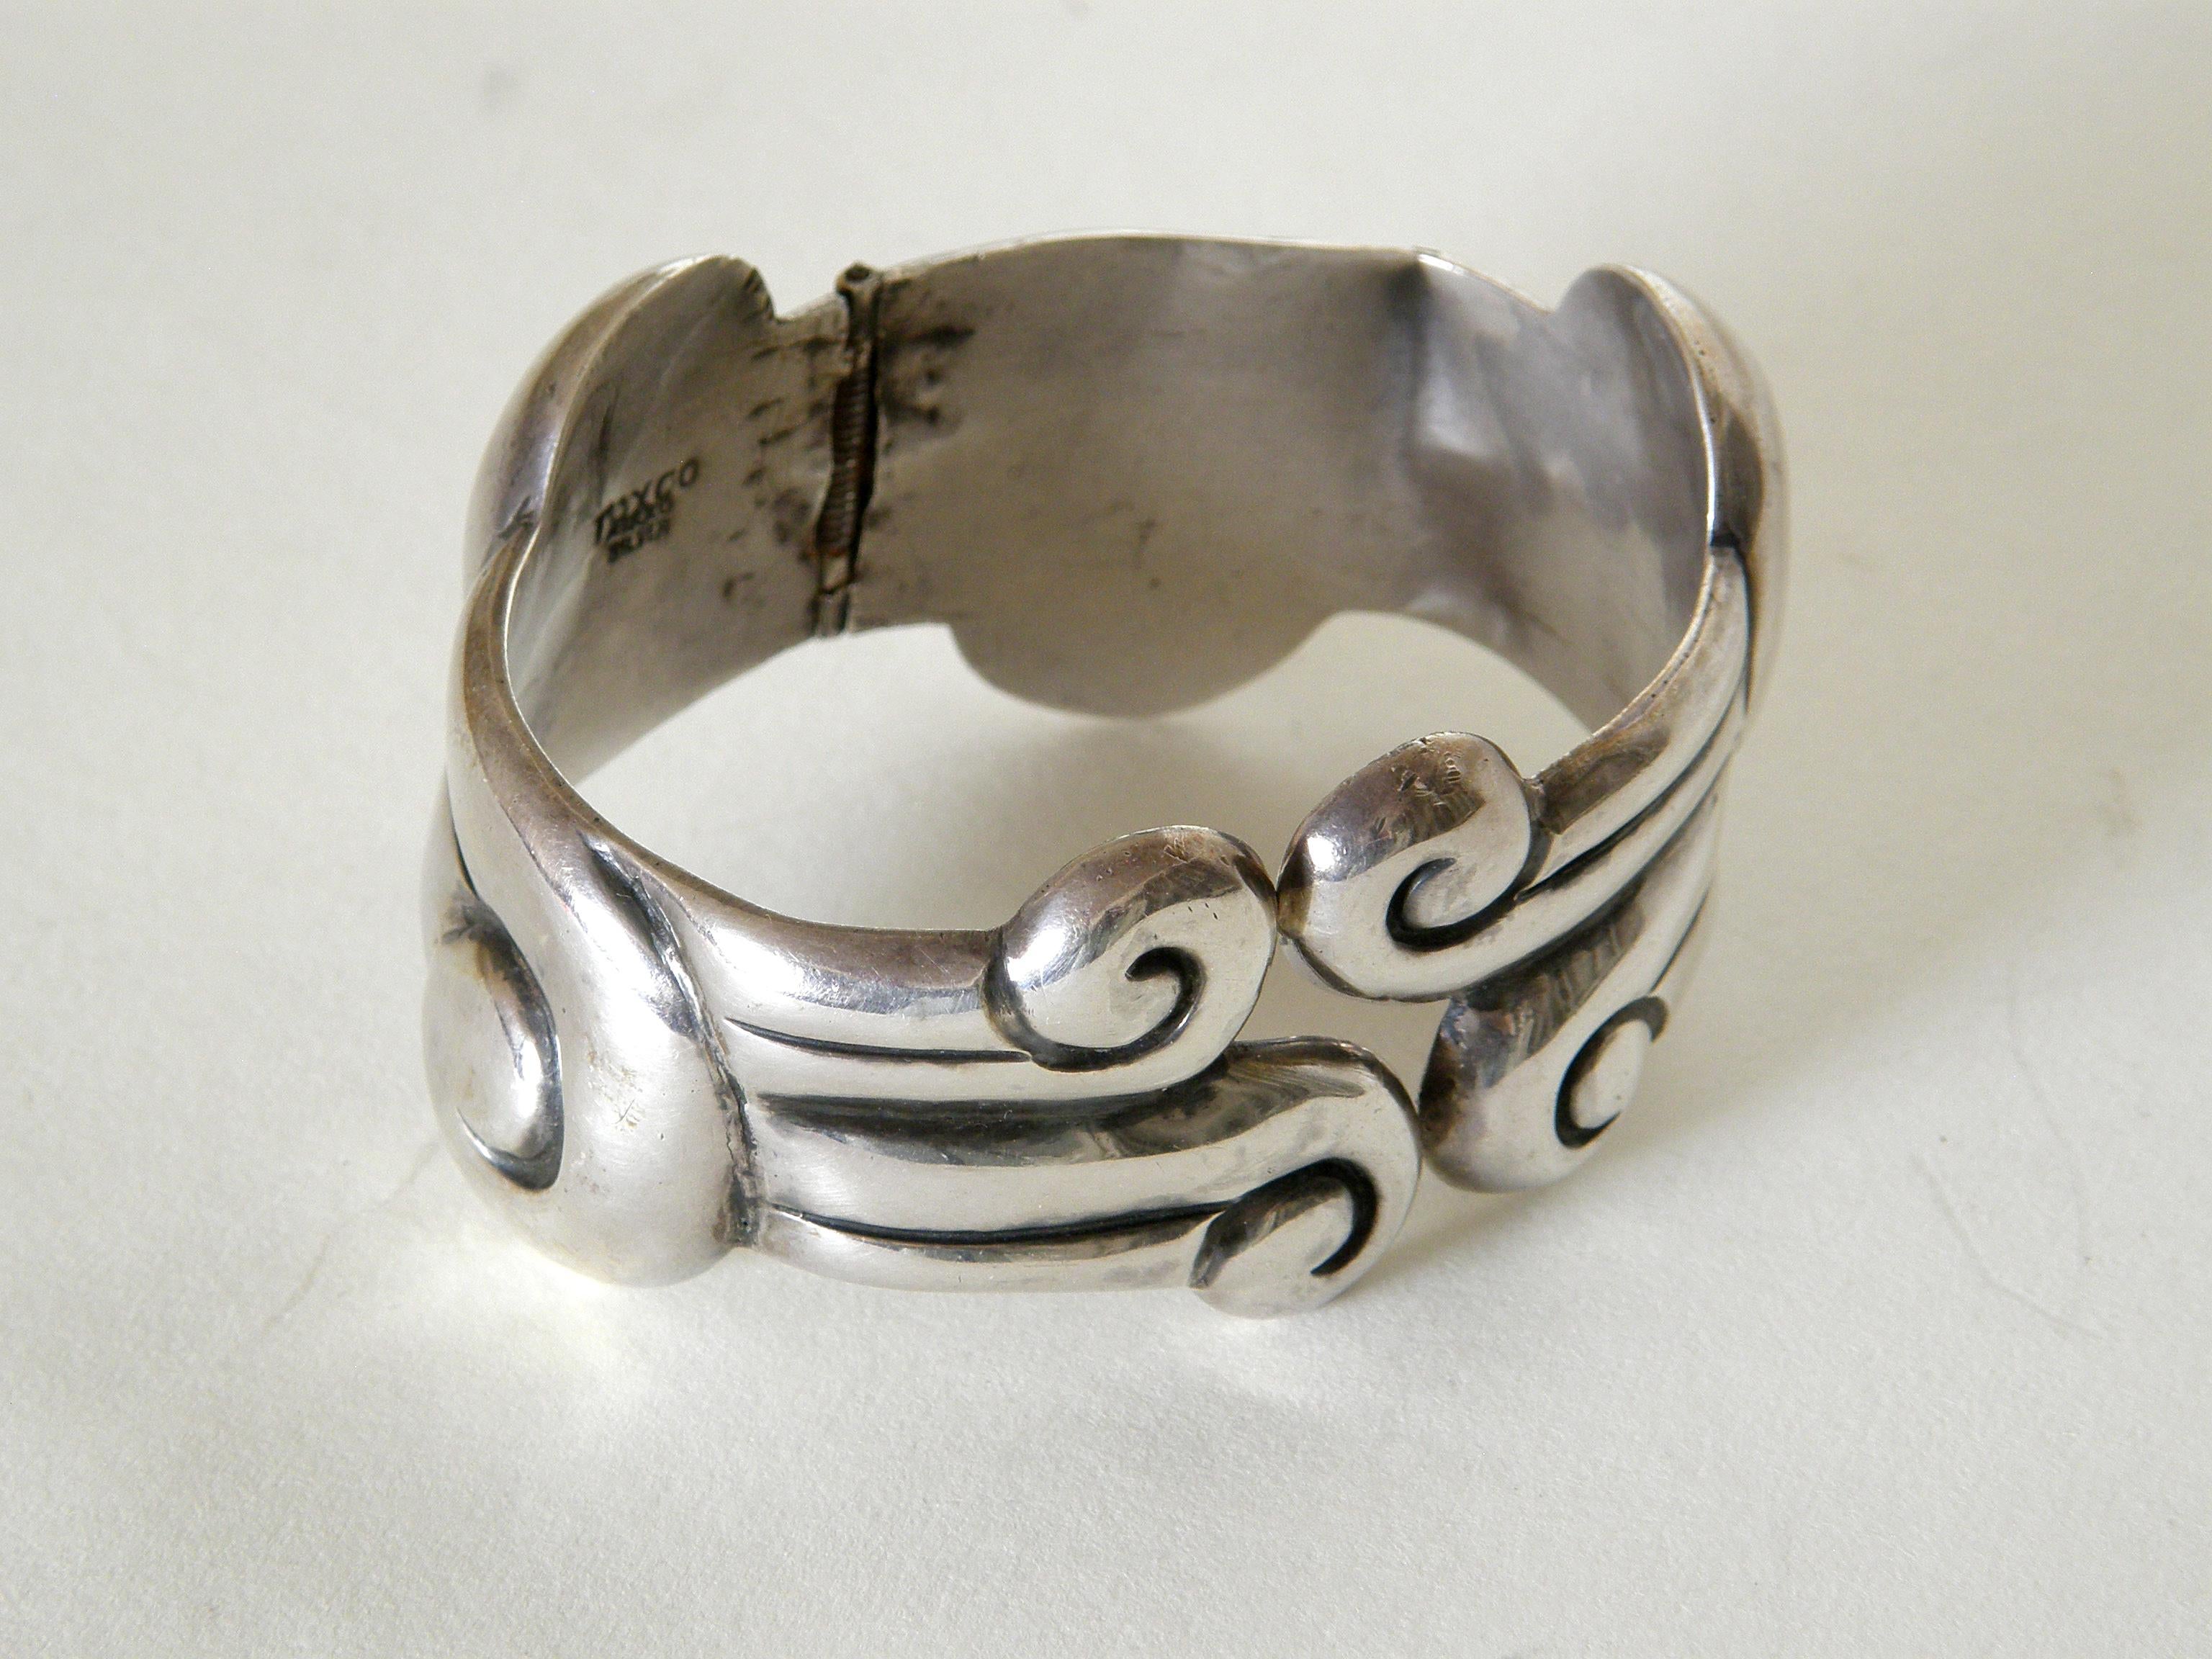 This sterling silver clamper bracelet was made in Taxco, Mexico. The scrolling design looks like stylized blowing wind or rolling waves. The spring is very strong and holds well.

marked : 